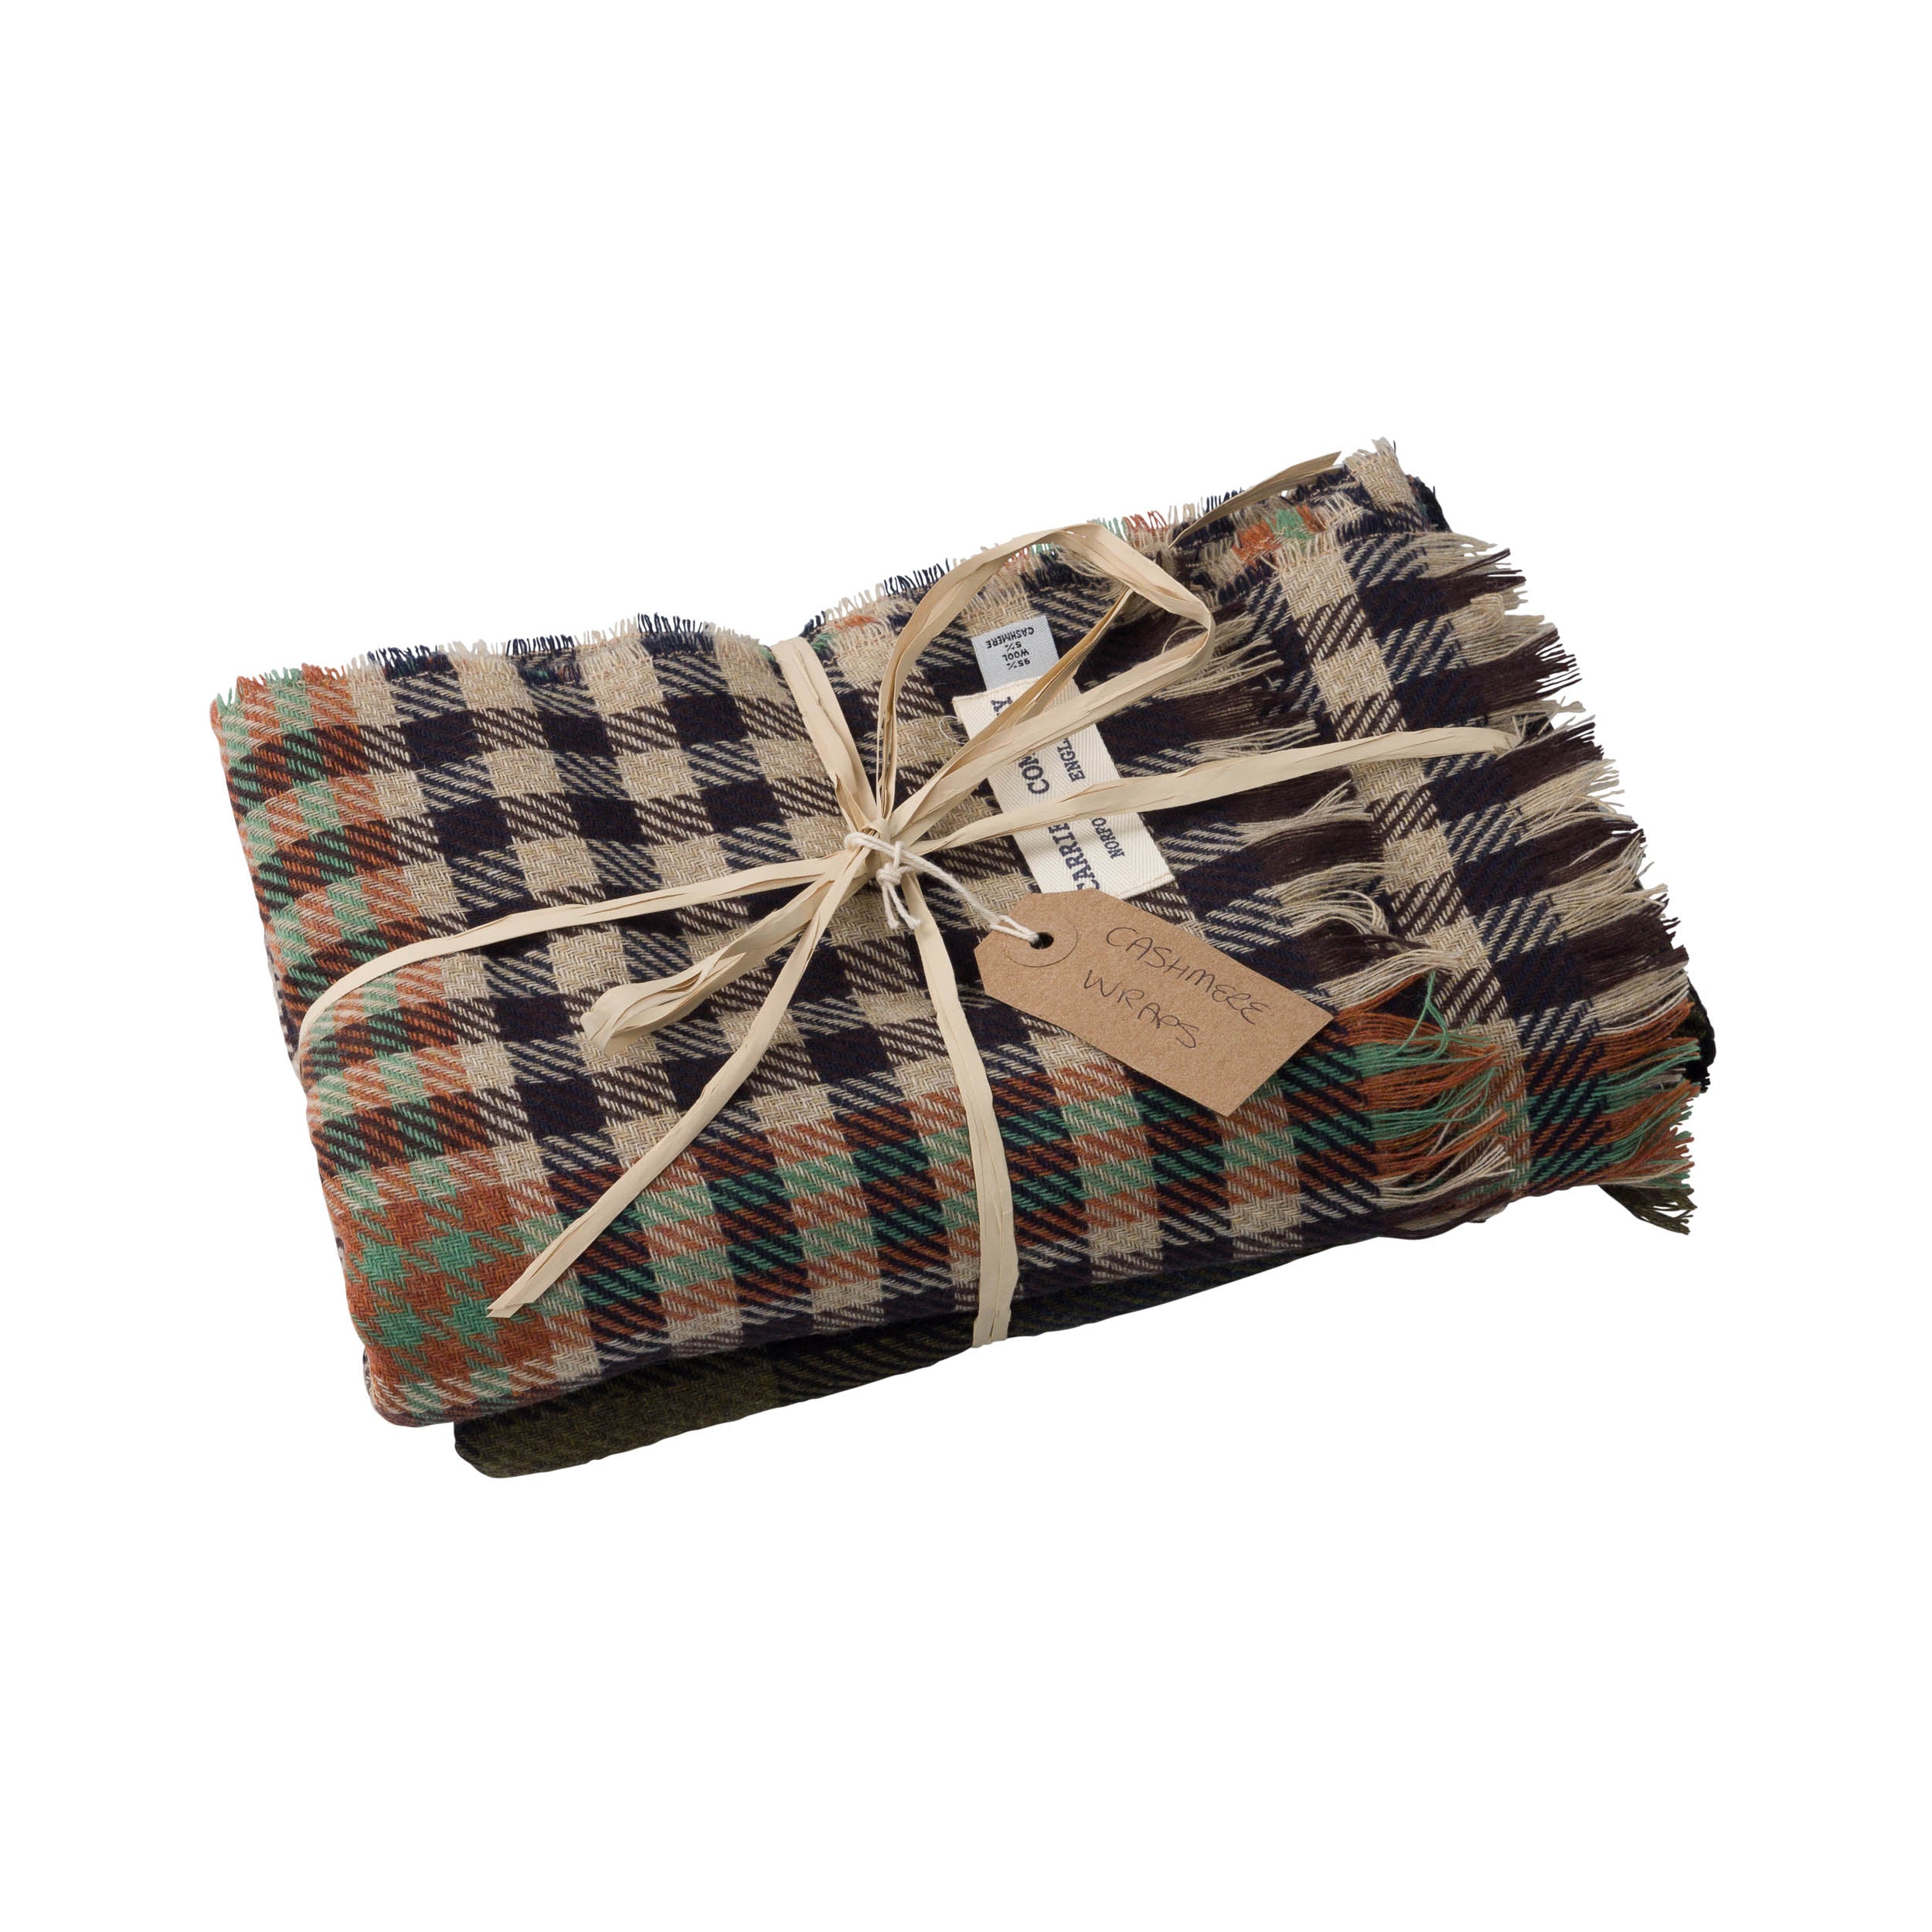 Carrier Company Luxury Cashmere & Lambswool Scarf in Antique Burns Tartan